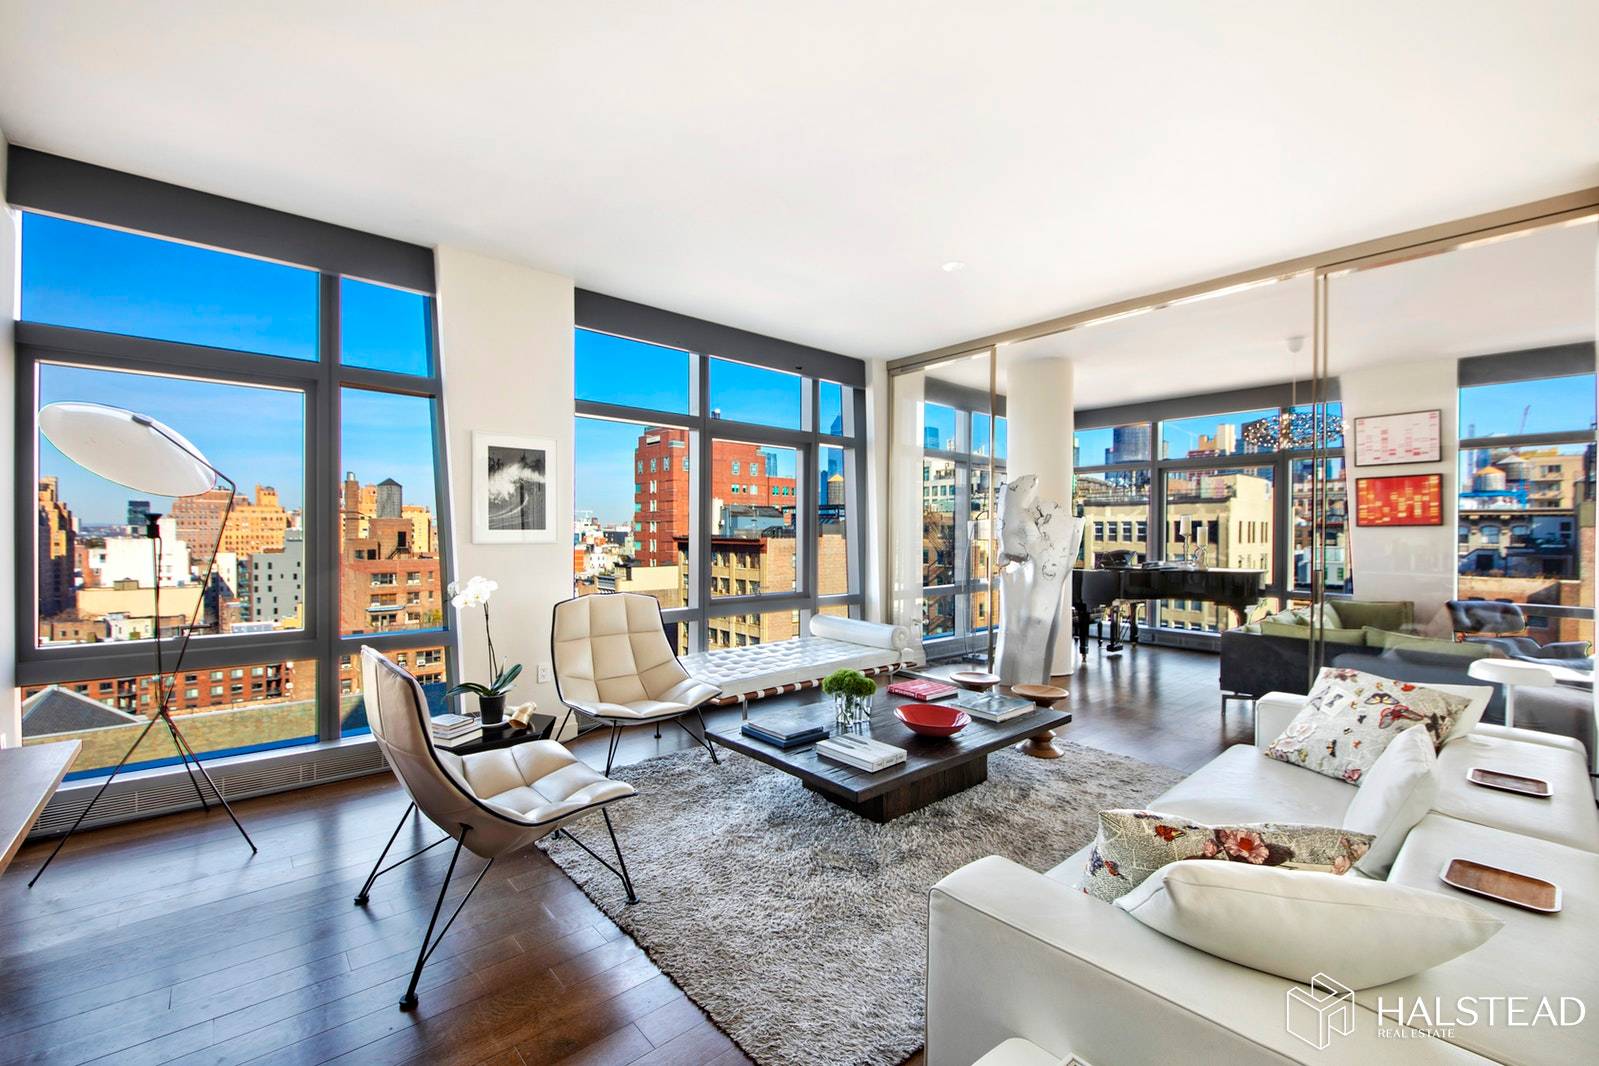 Enjoy brilliant light and breathtaking city views from every room in this mint and elegant high floor luxury residence located at 35XV, an FX Fowle designed, full service, centrally located ...